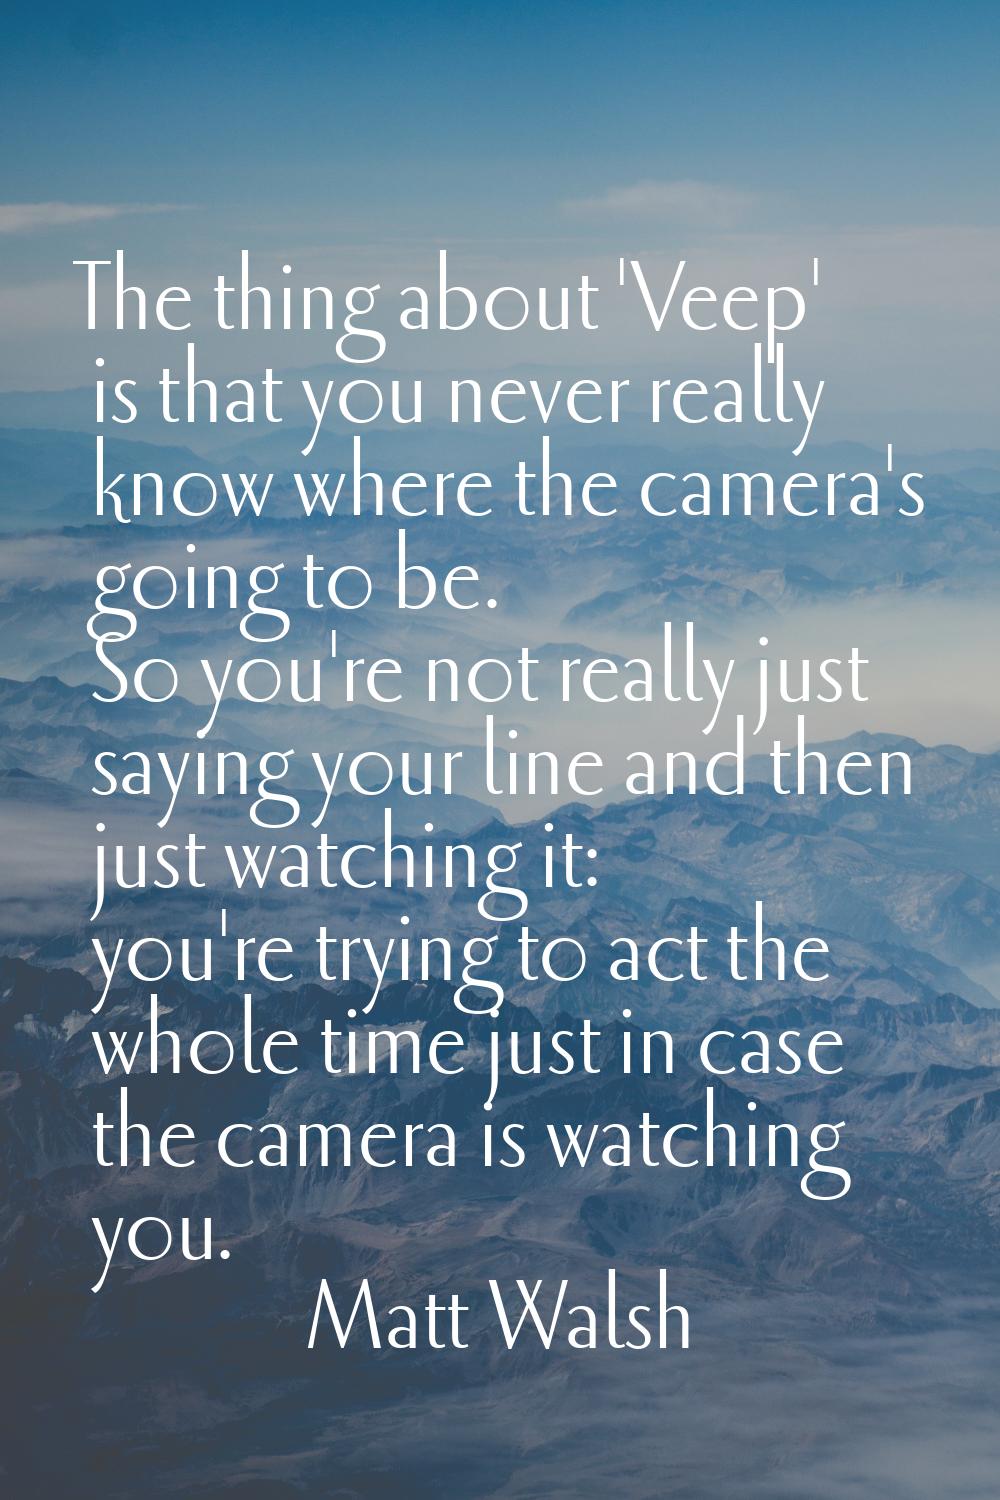 The thing about 'Veep' is that you never really know where the camera's going to be. So you're not 